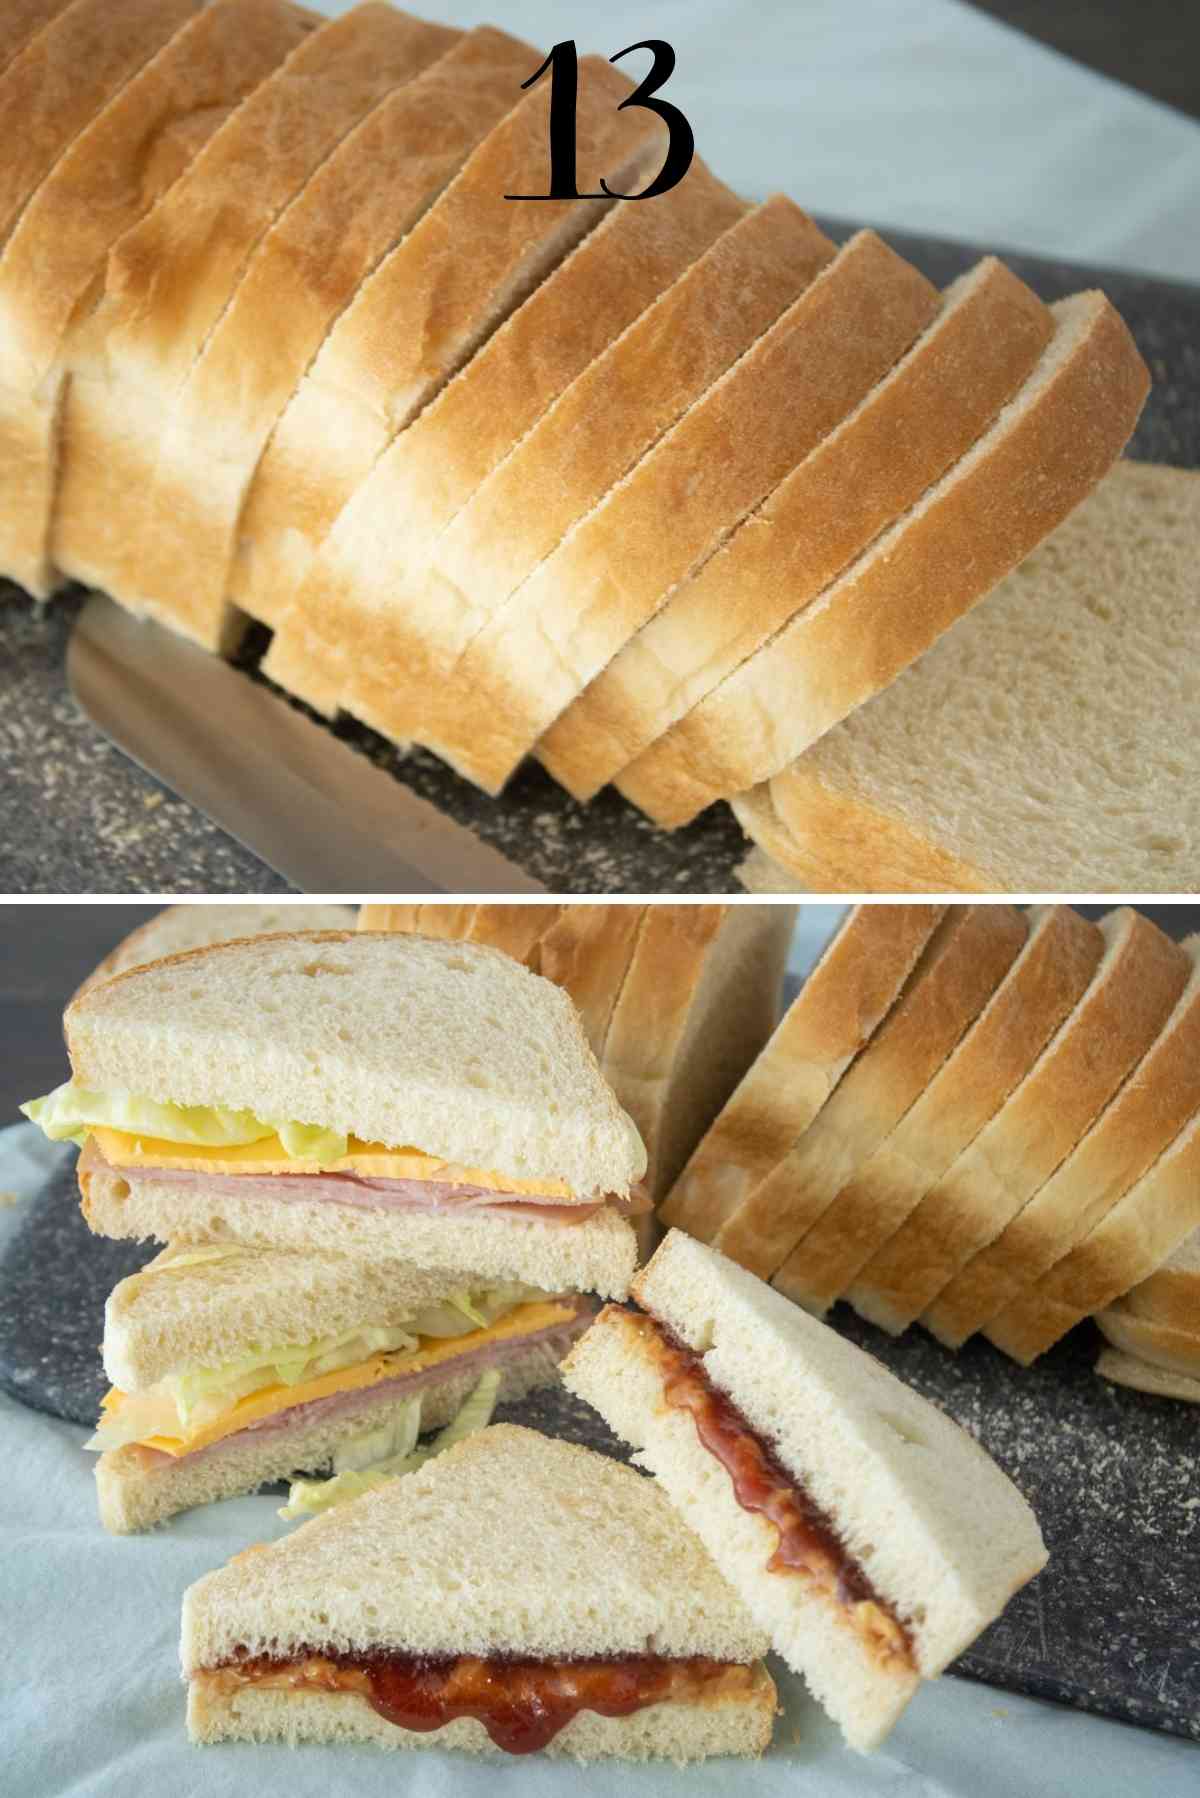 Loaf sliced into slices and sandwiches made.